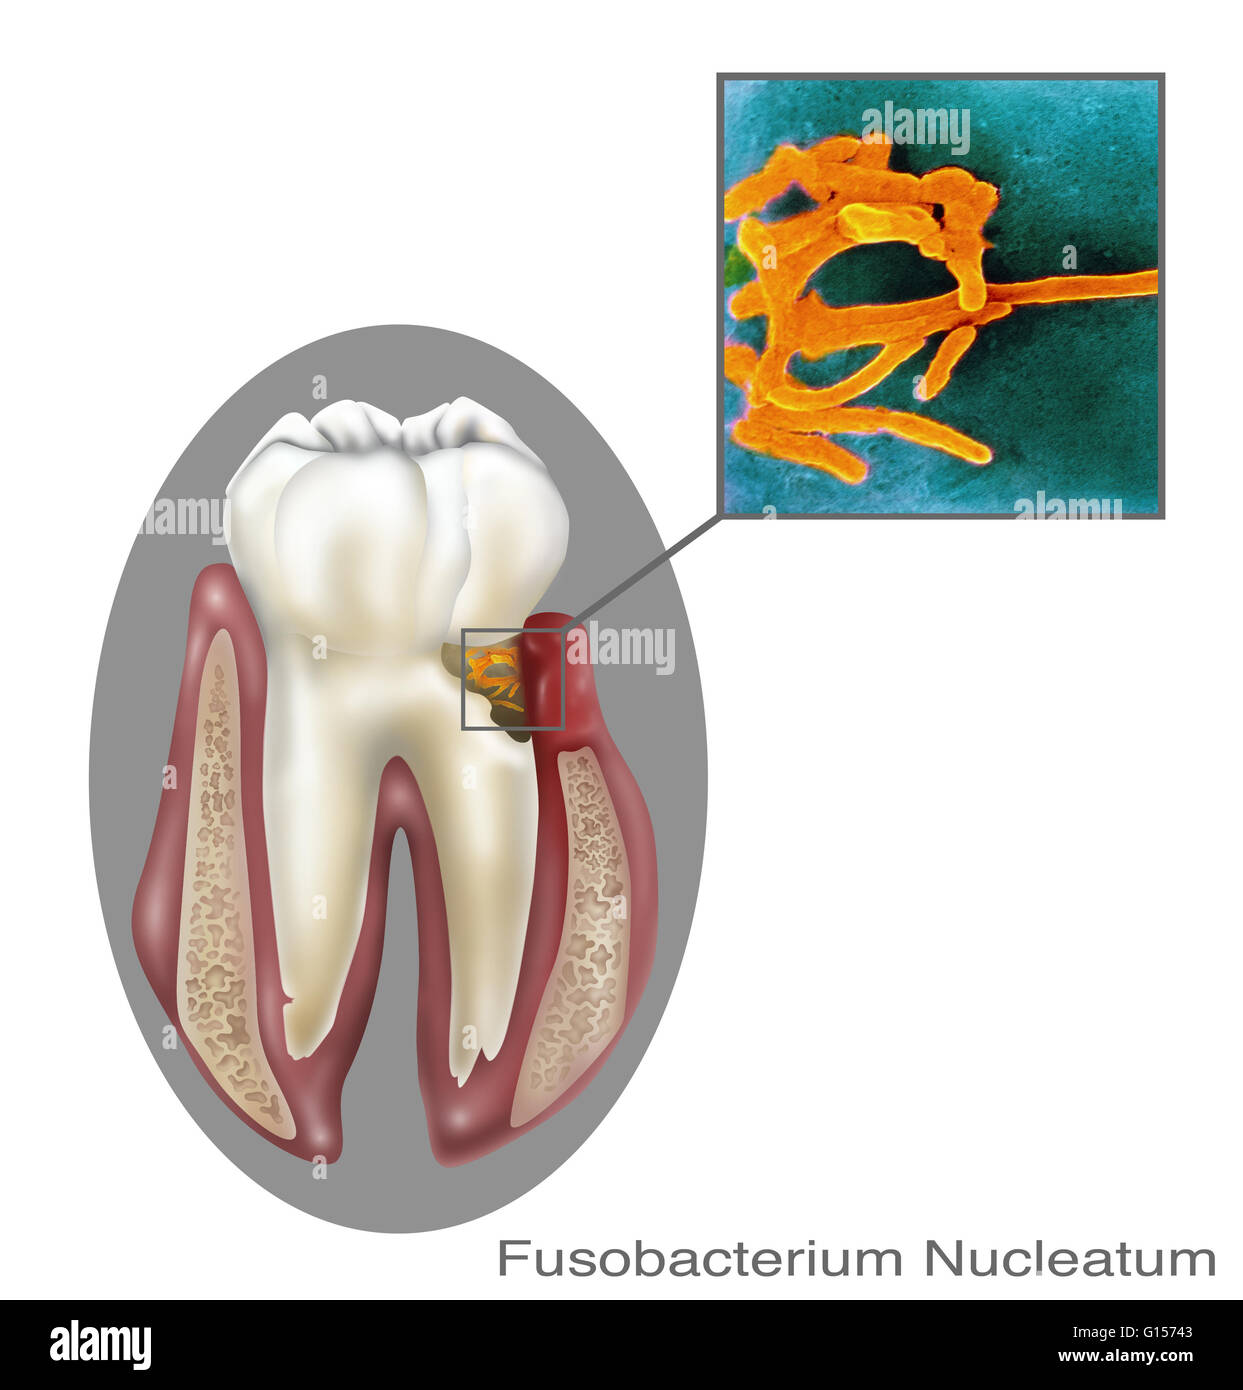 Fusobacterium nucleatum, oral bacteria found in the dental plaque of humans. Associated with the periodontal gum disease. Stock Photo